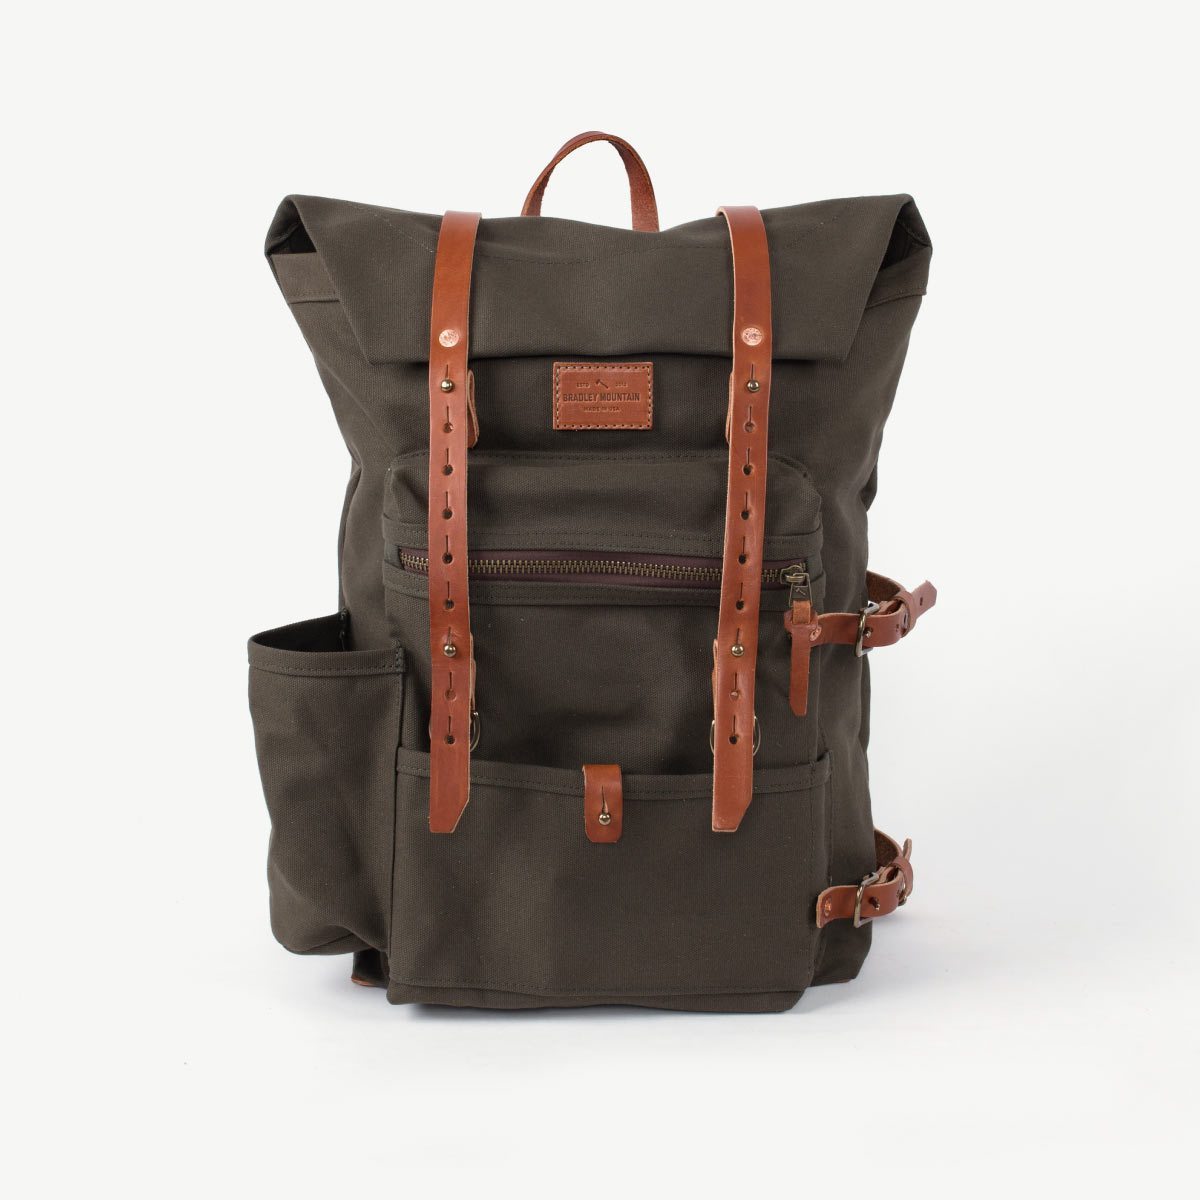 Bradley Mountain The Wilder Backpack | The Coolector